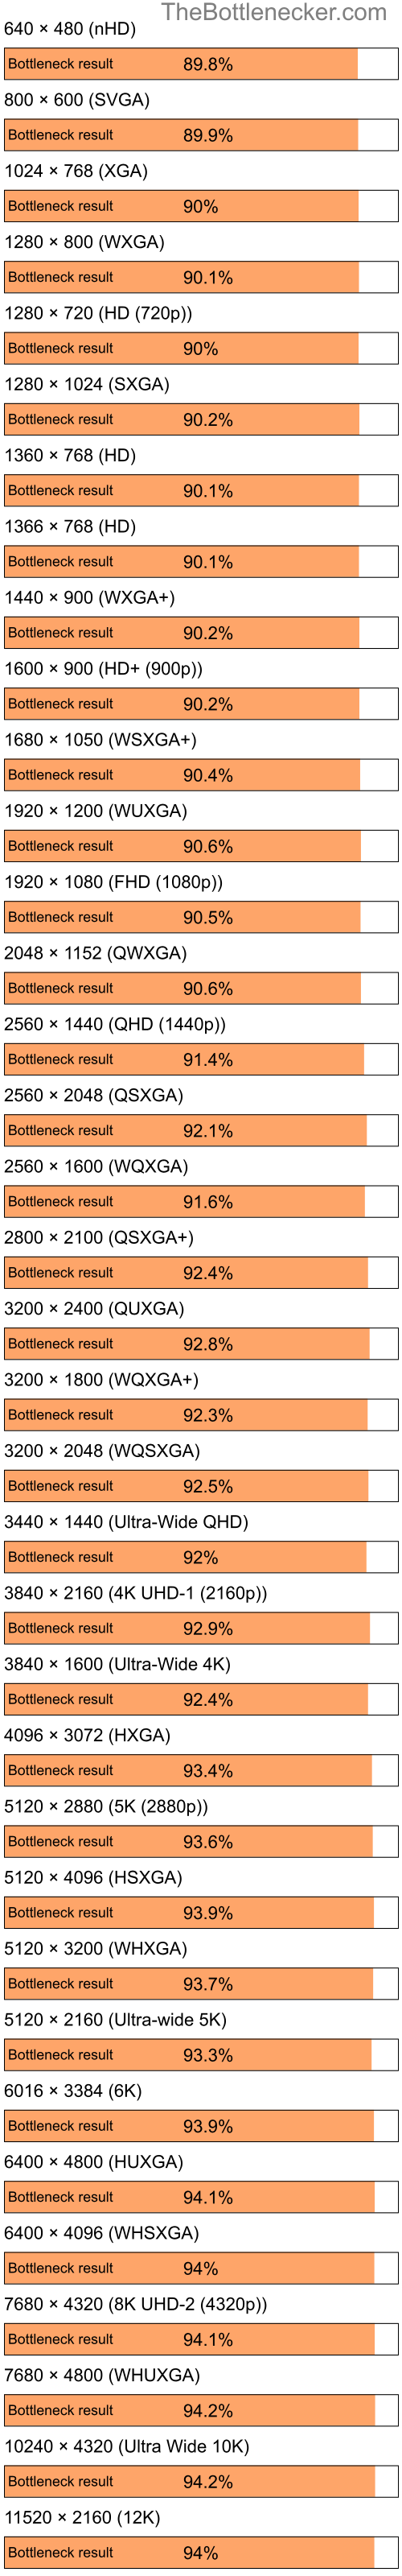 Bottleneck results by resolution for Intel Pentium 4 and NVIDIA GeForce2 GTS in General Tasks